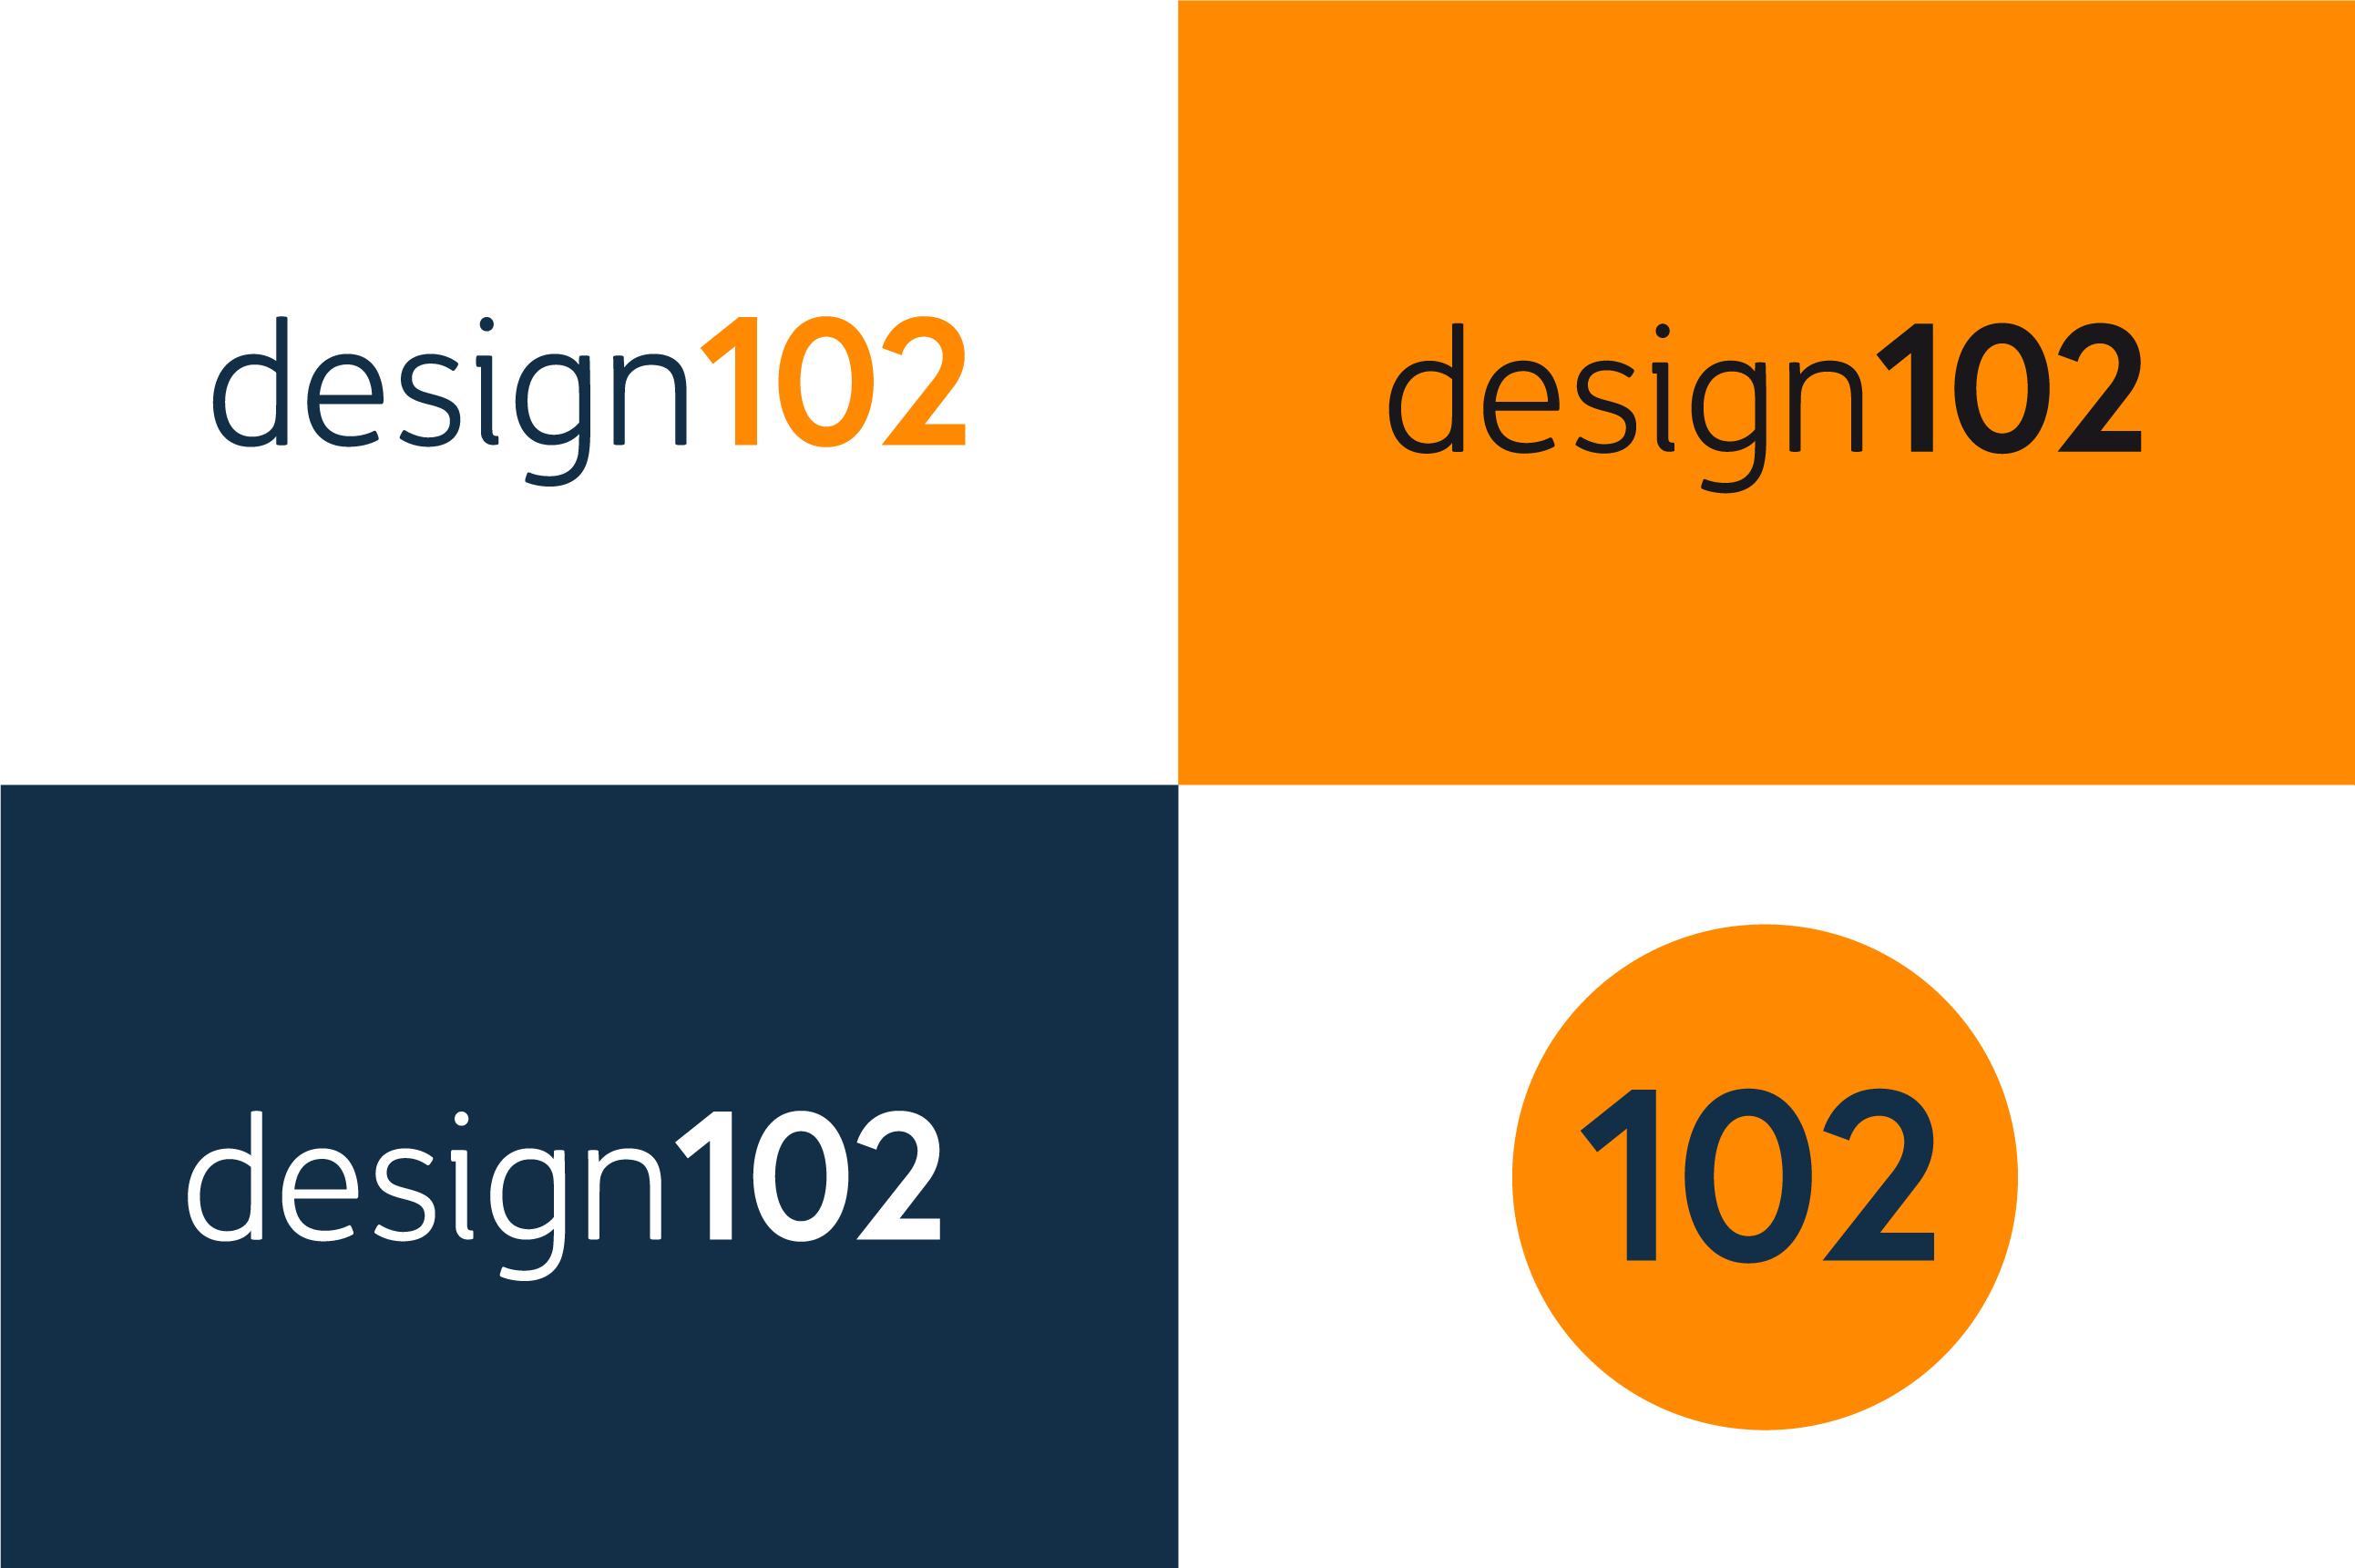 Four examples of the Design102 logo in use, including a colour (navy ‘design’, orange ‘102’) logo against a white background, a black text logo against an orange background, a white text logo against a navy background, and a favicon featuring an orange roundel with 102 in navy overlaid.